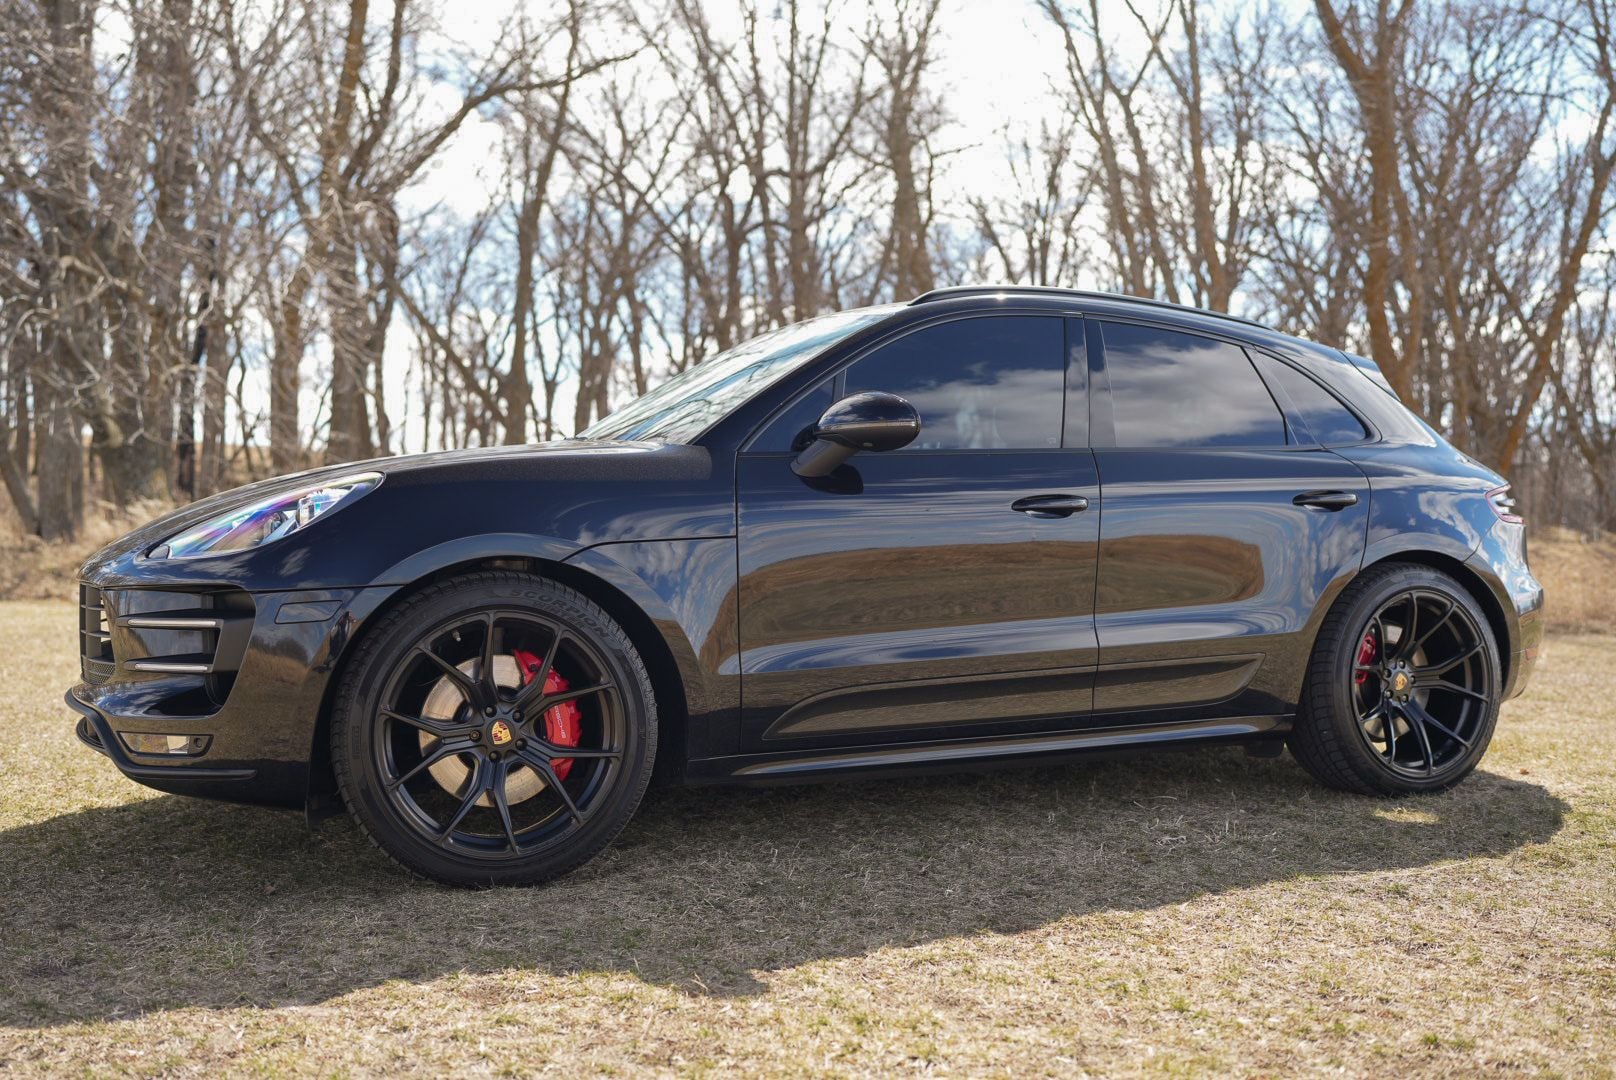 2015 Porsche Macan - High MSRP very clean Macan Turbo - Used - VIN WP1AF2A59FLB92601 - 65,000 Miles - 6 cyl - AWD - Automatic - SUV - Black - Battle Lake, MN 56515, United States